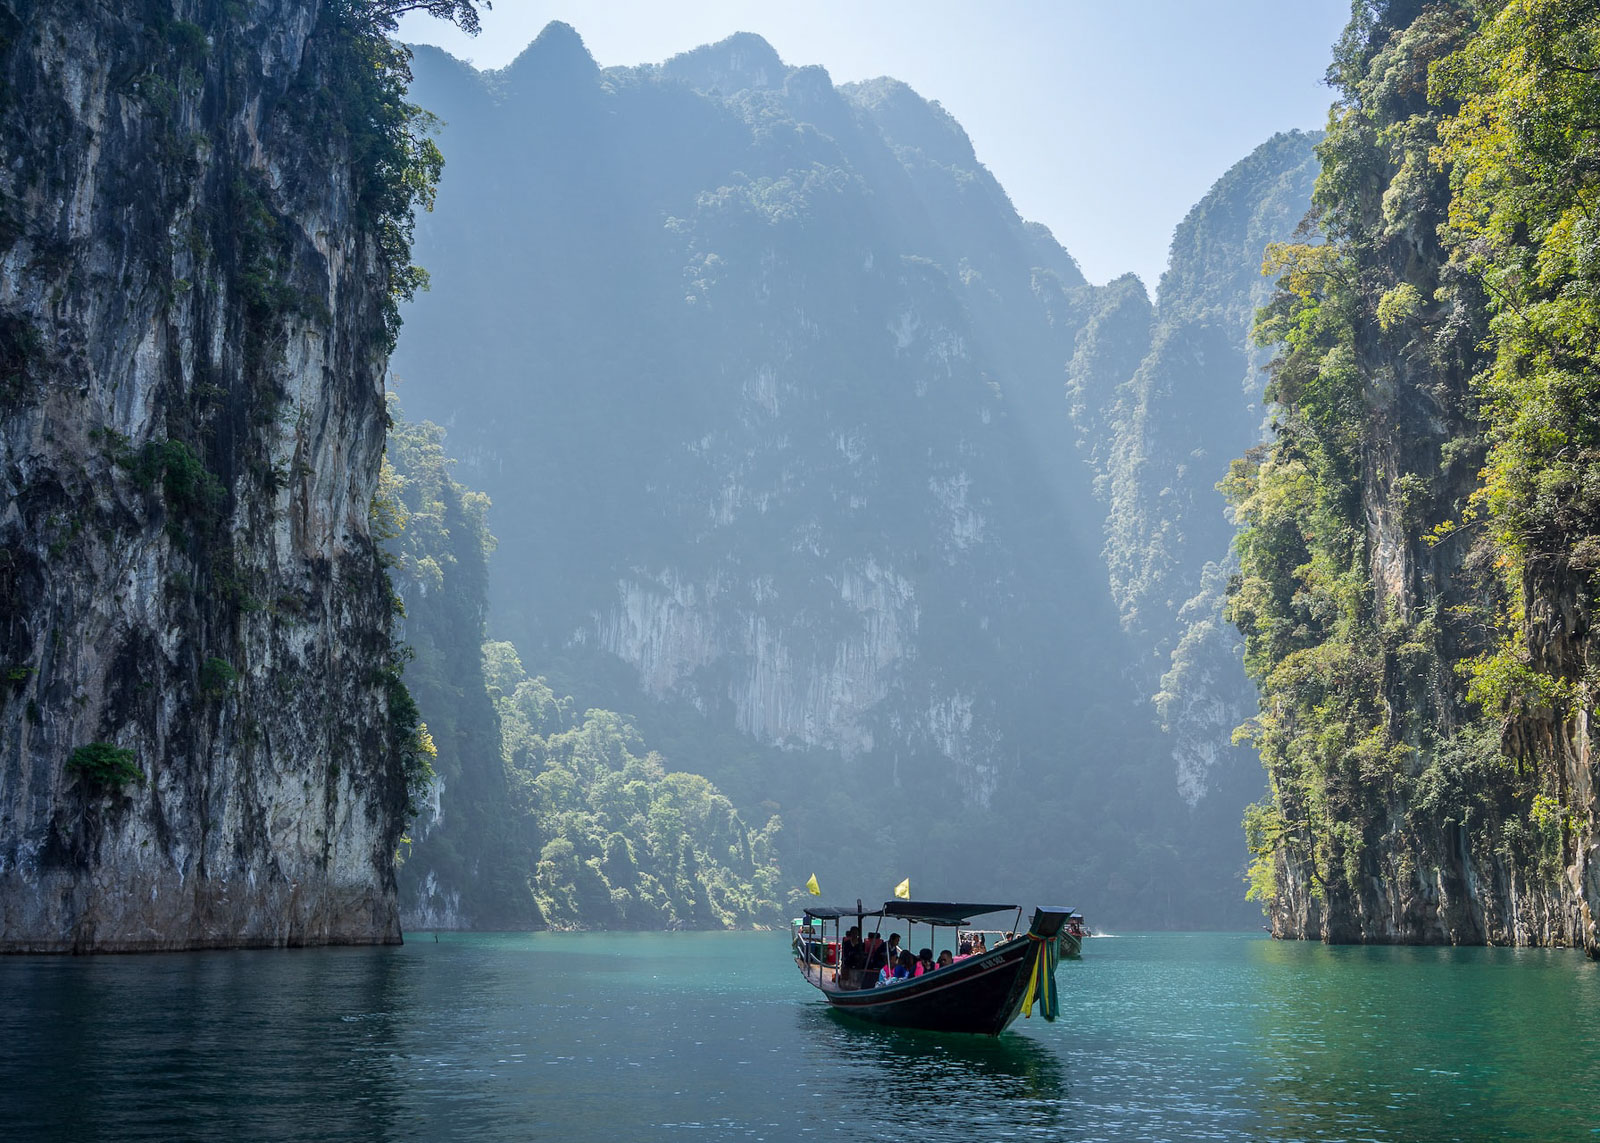 Vietnam vs Thailand: Which is Better to Travel To?